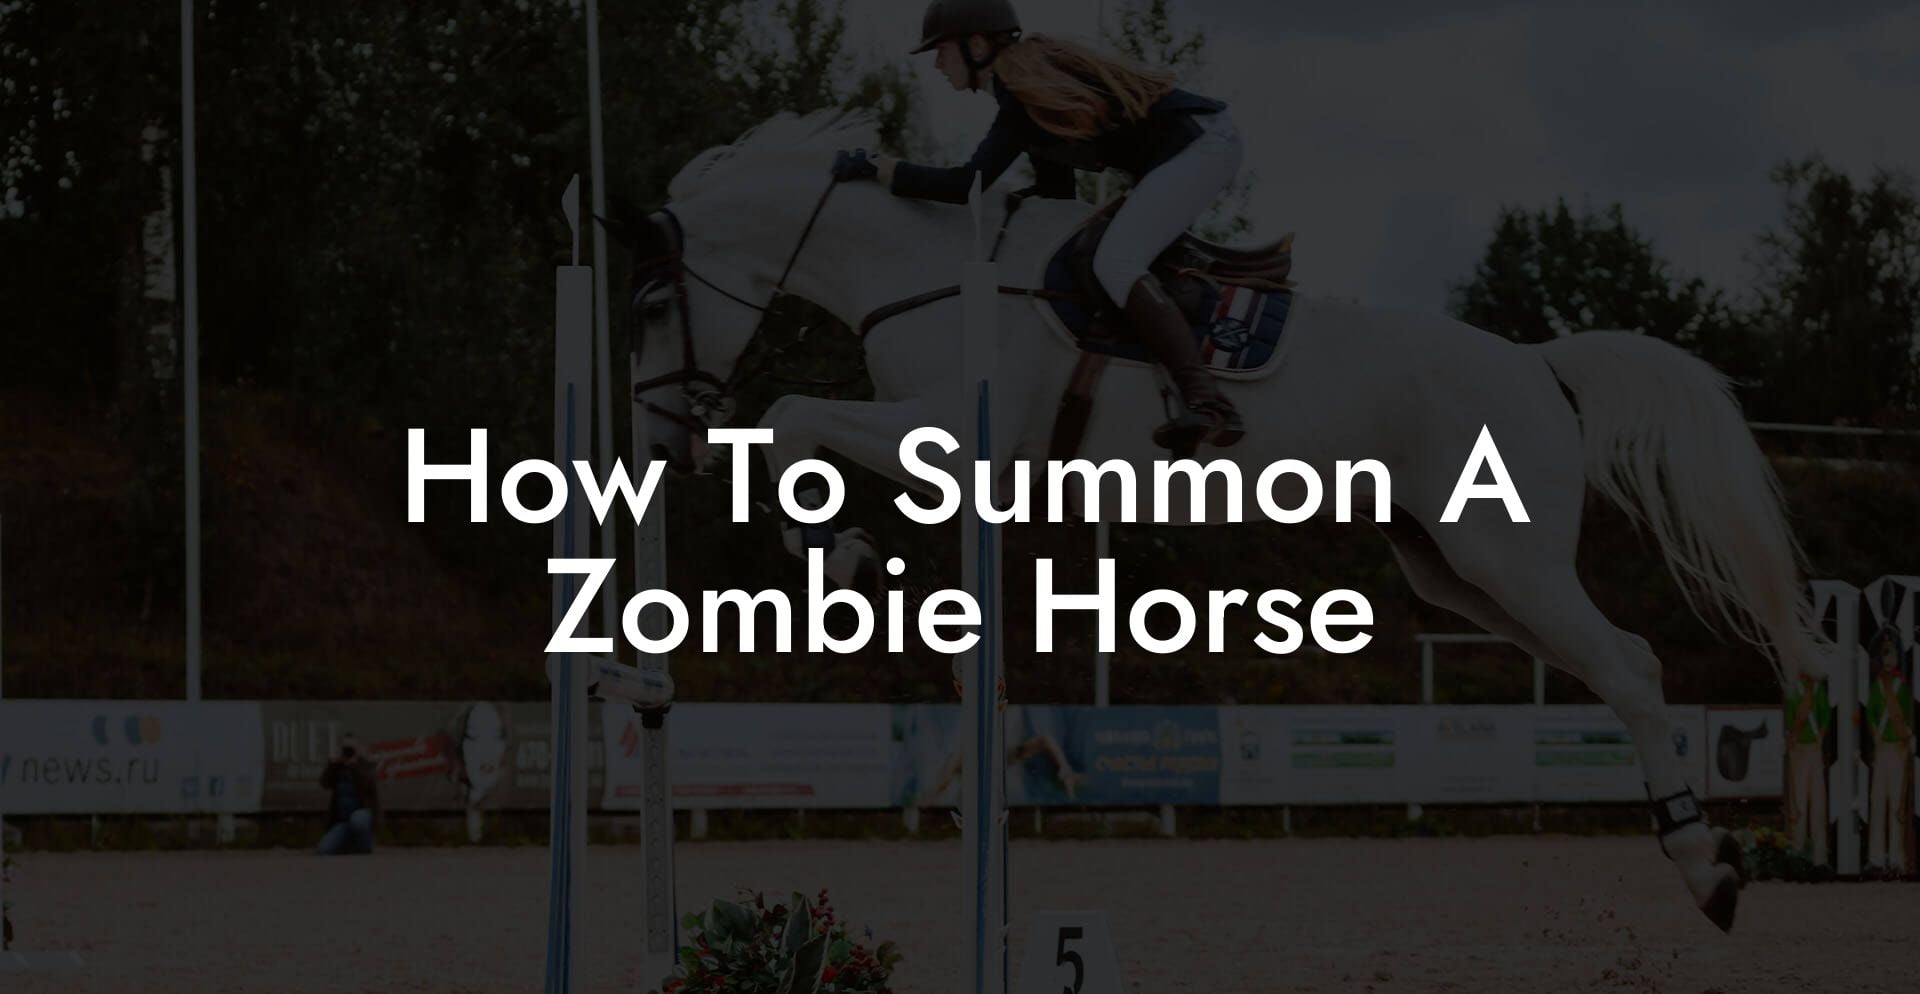 How To Summon A Zombie Horse